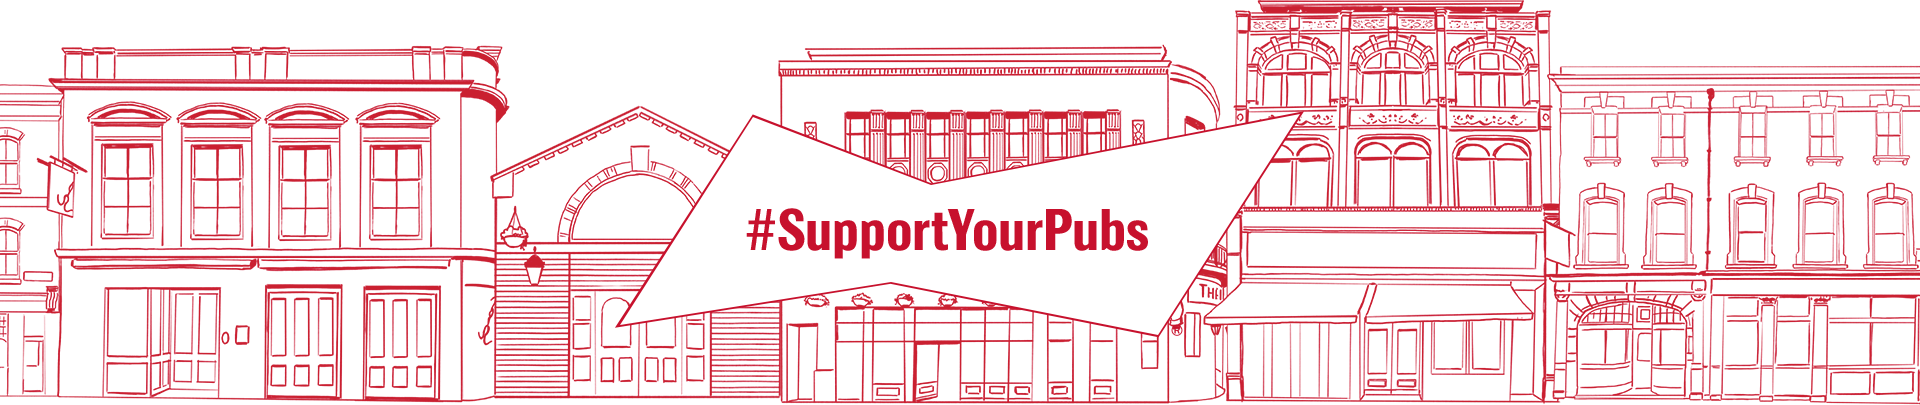 Support your pubs